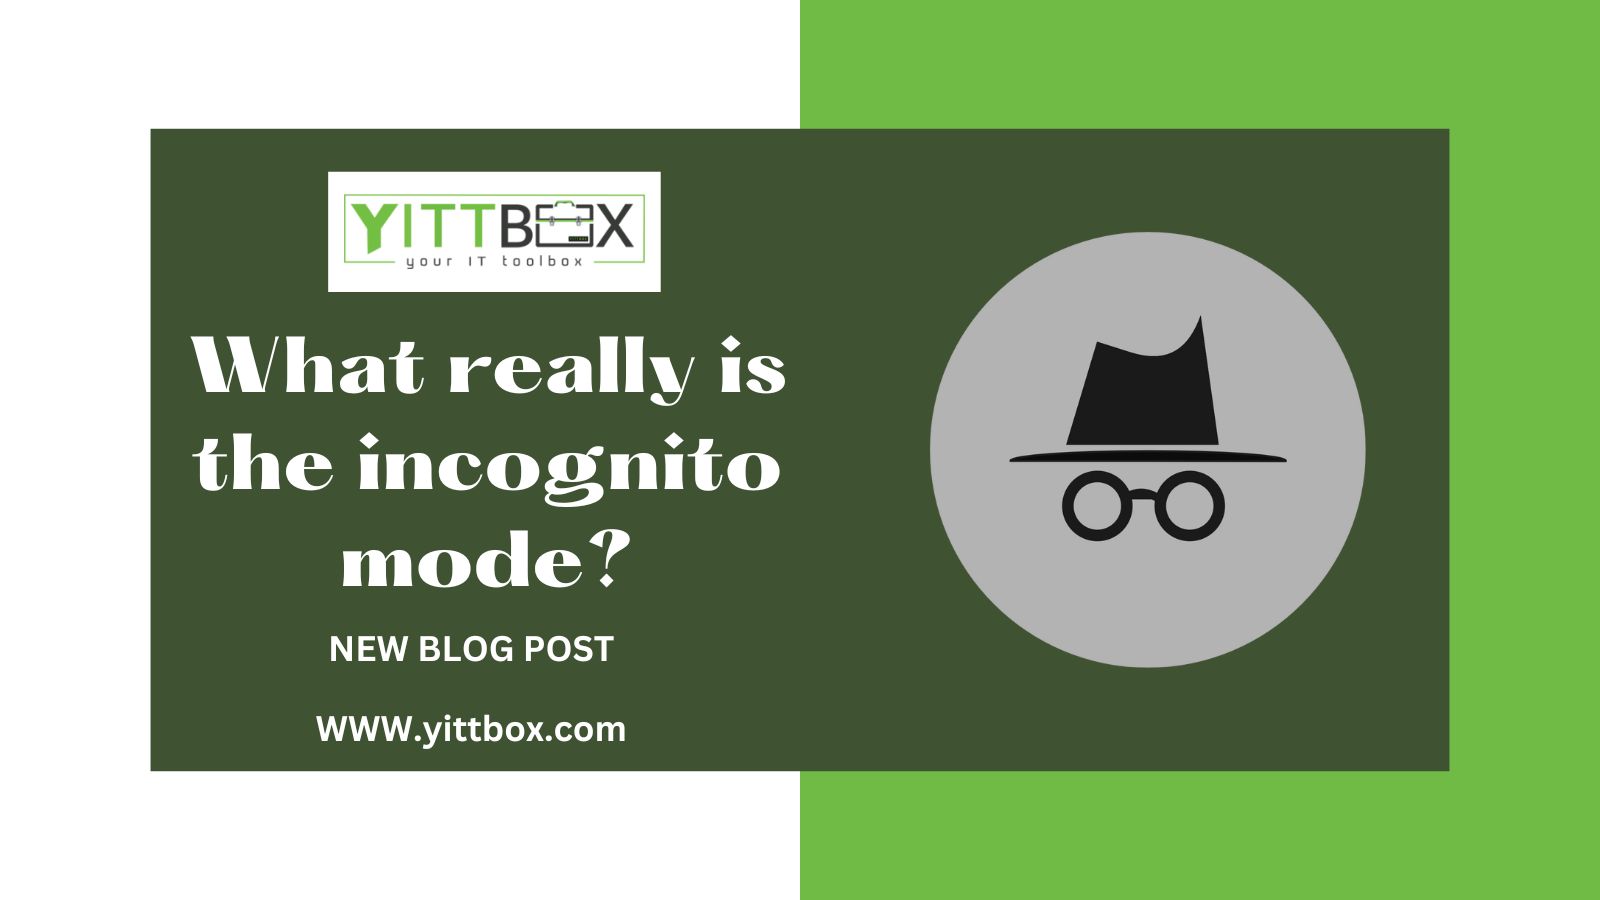 What really is the incognito mode?